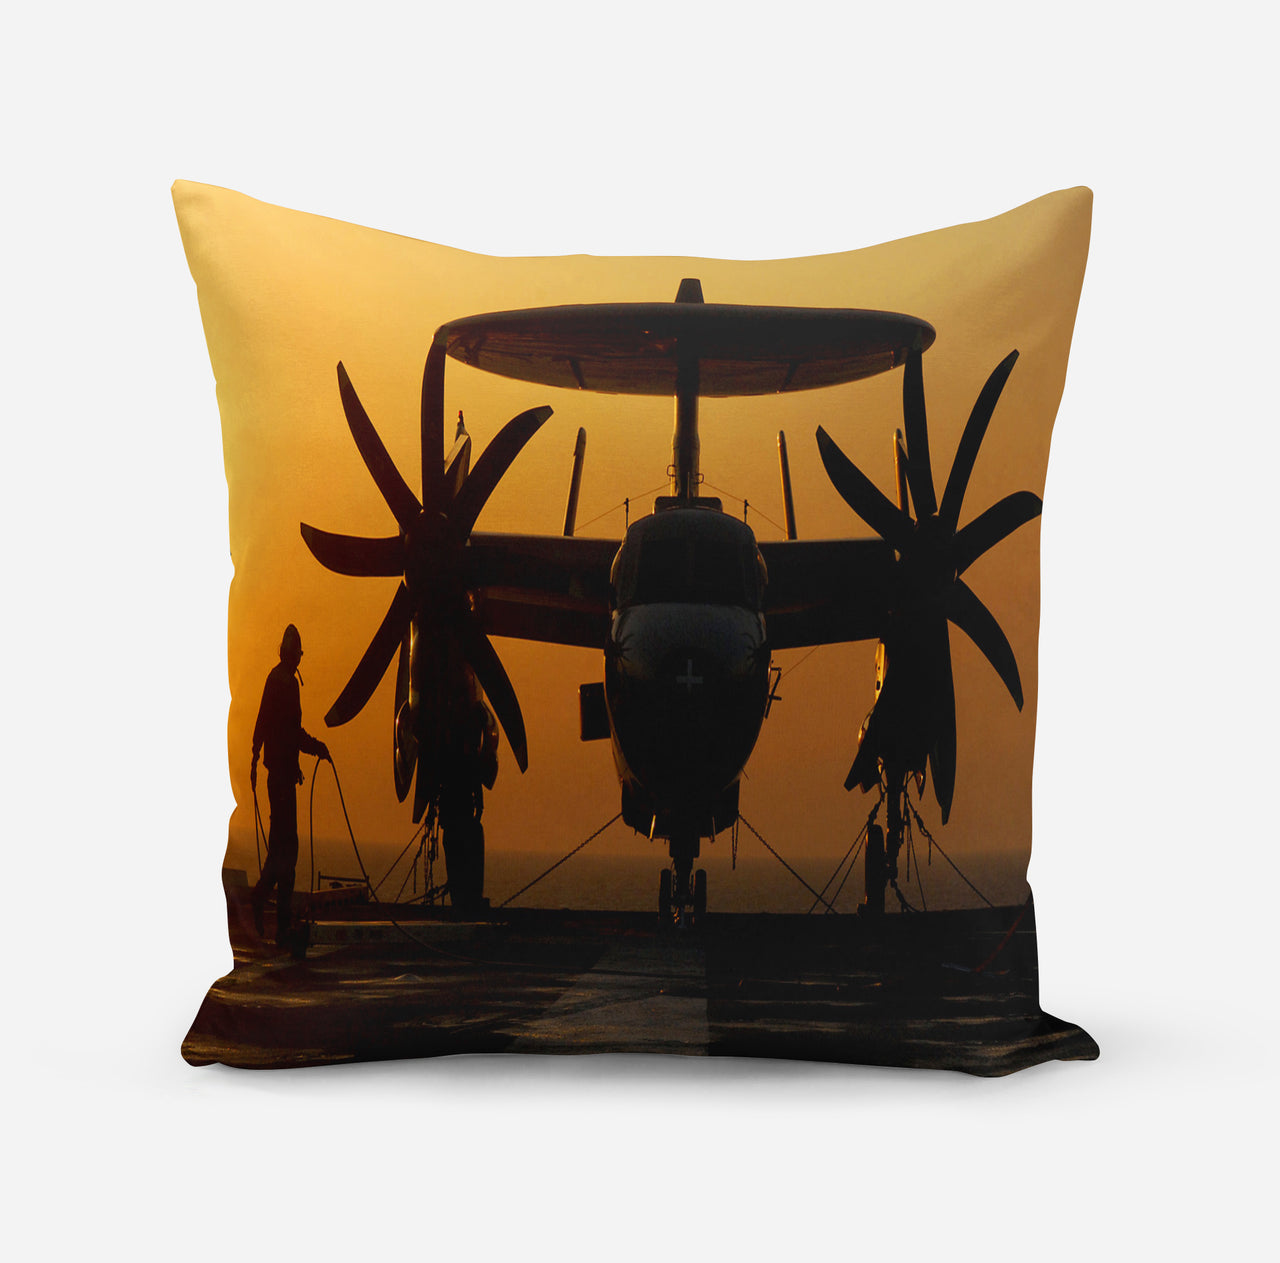 Military Plane at Sunset Designed Pillows